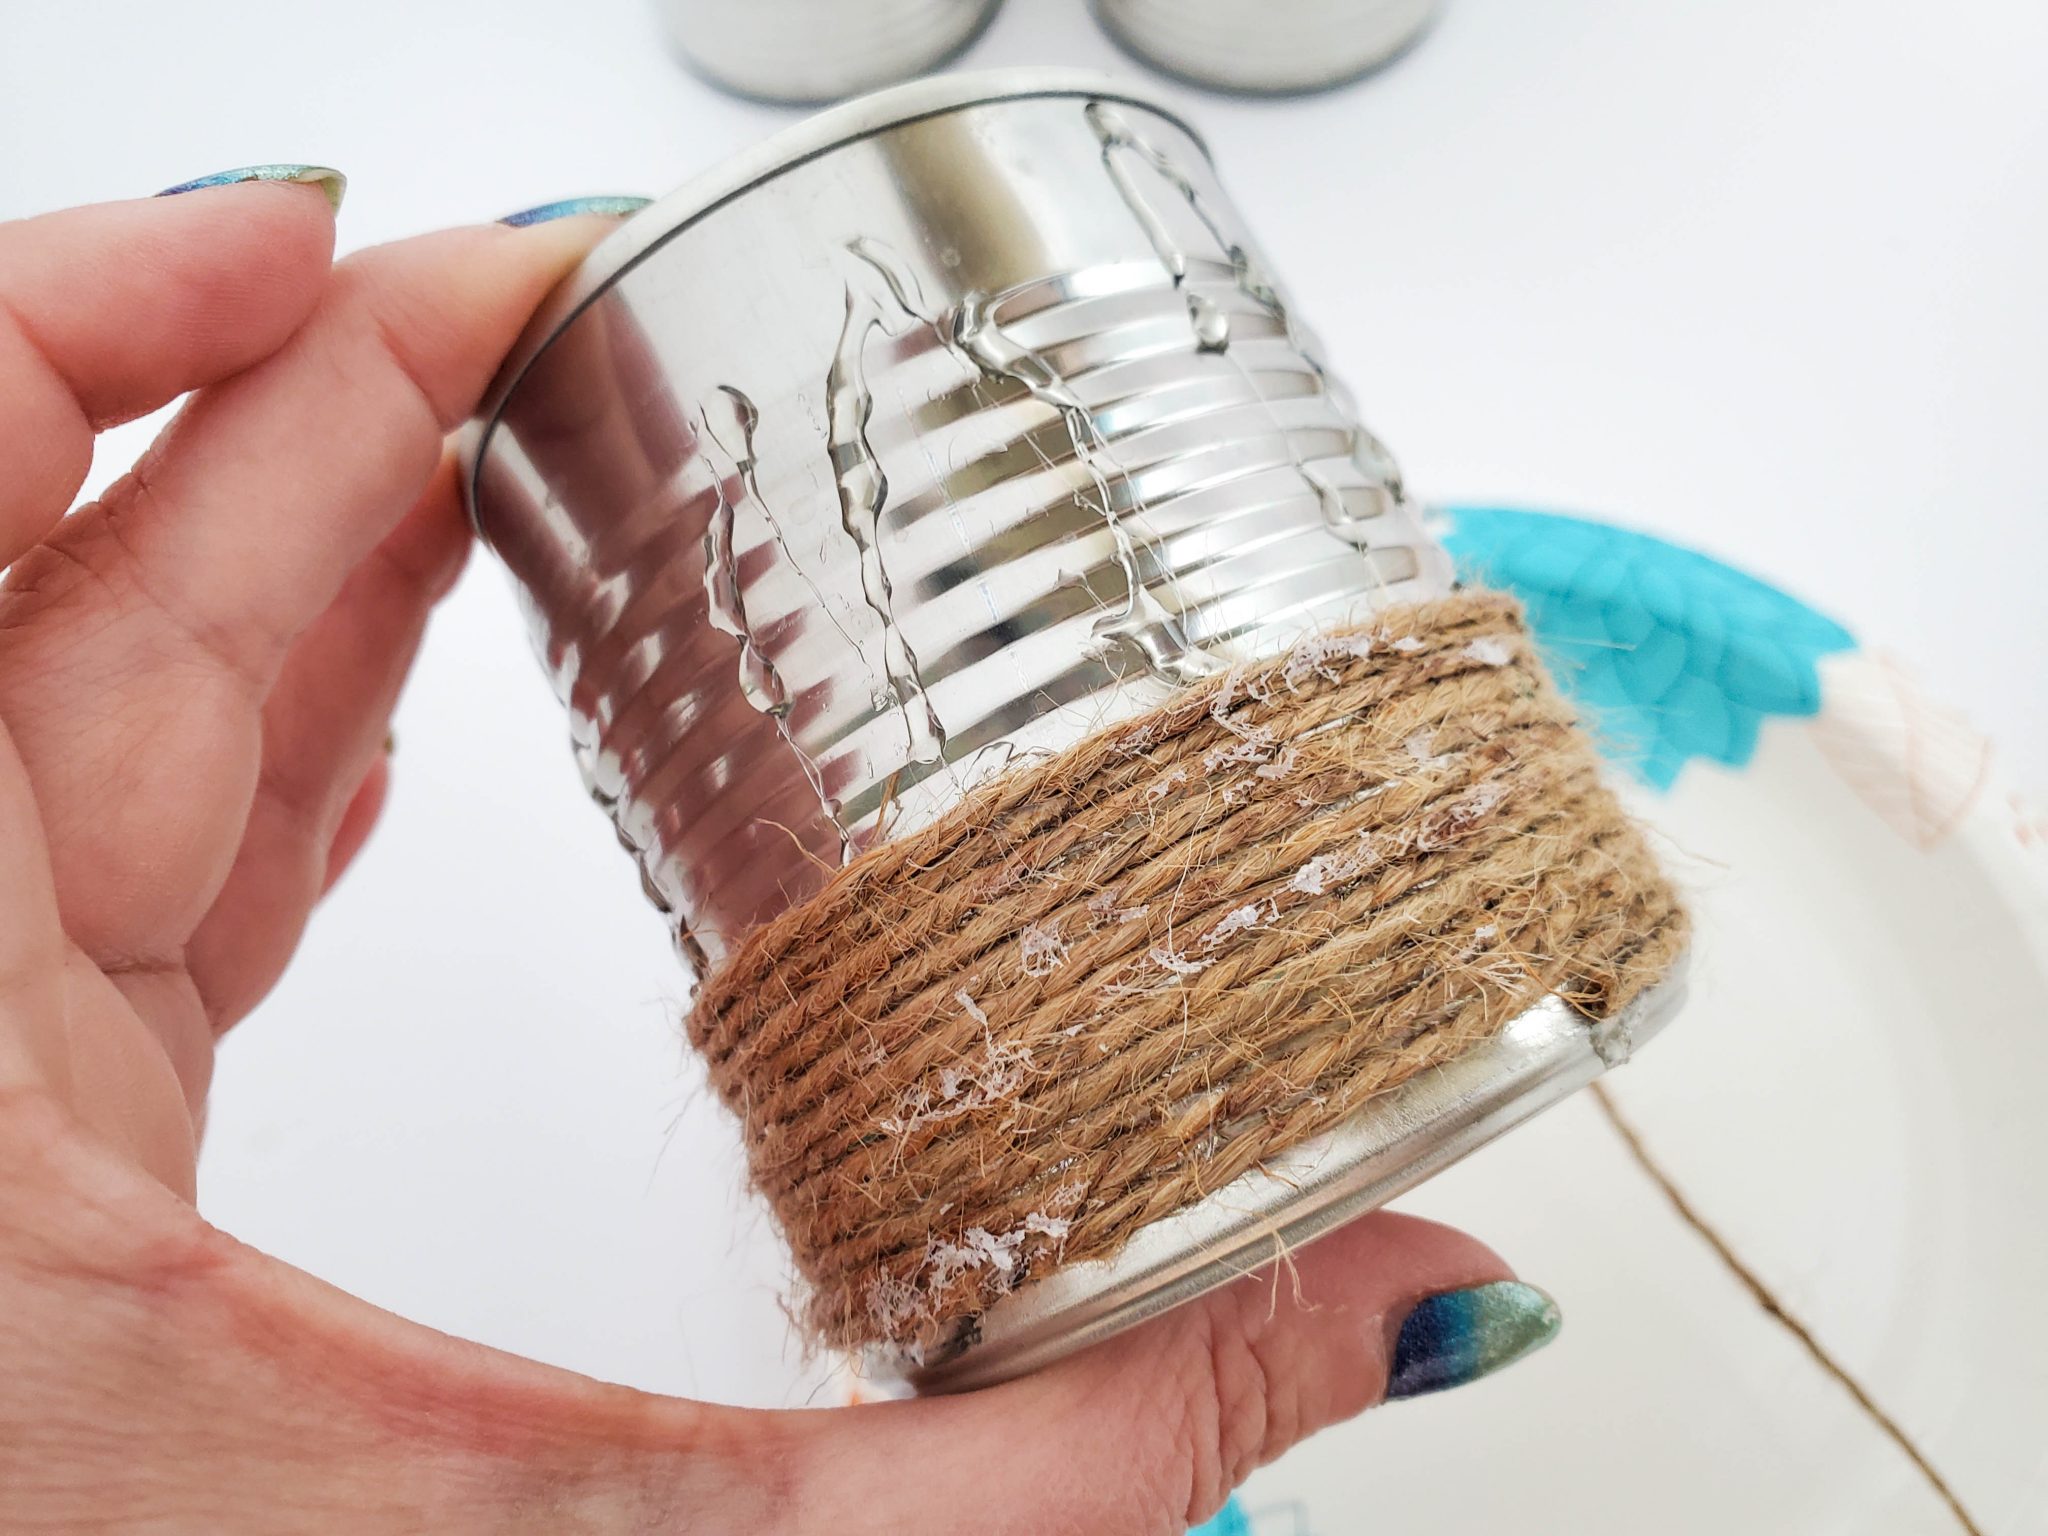 Gluing twine to a can